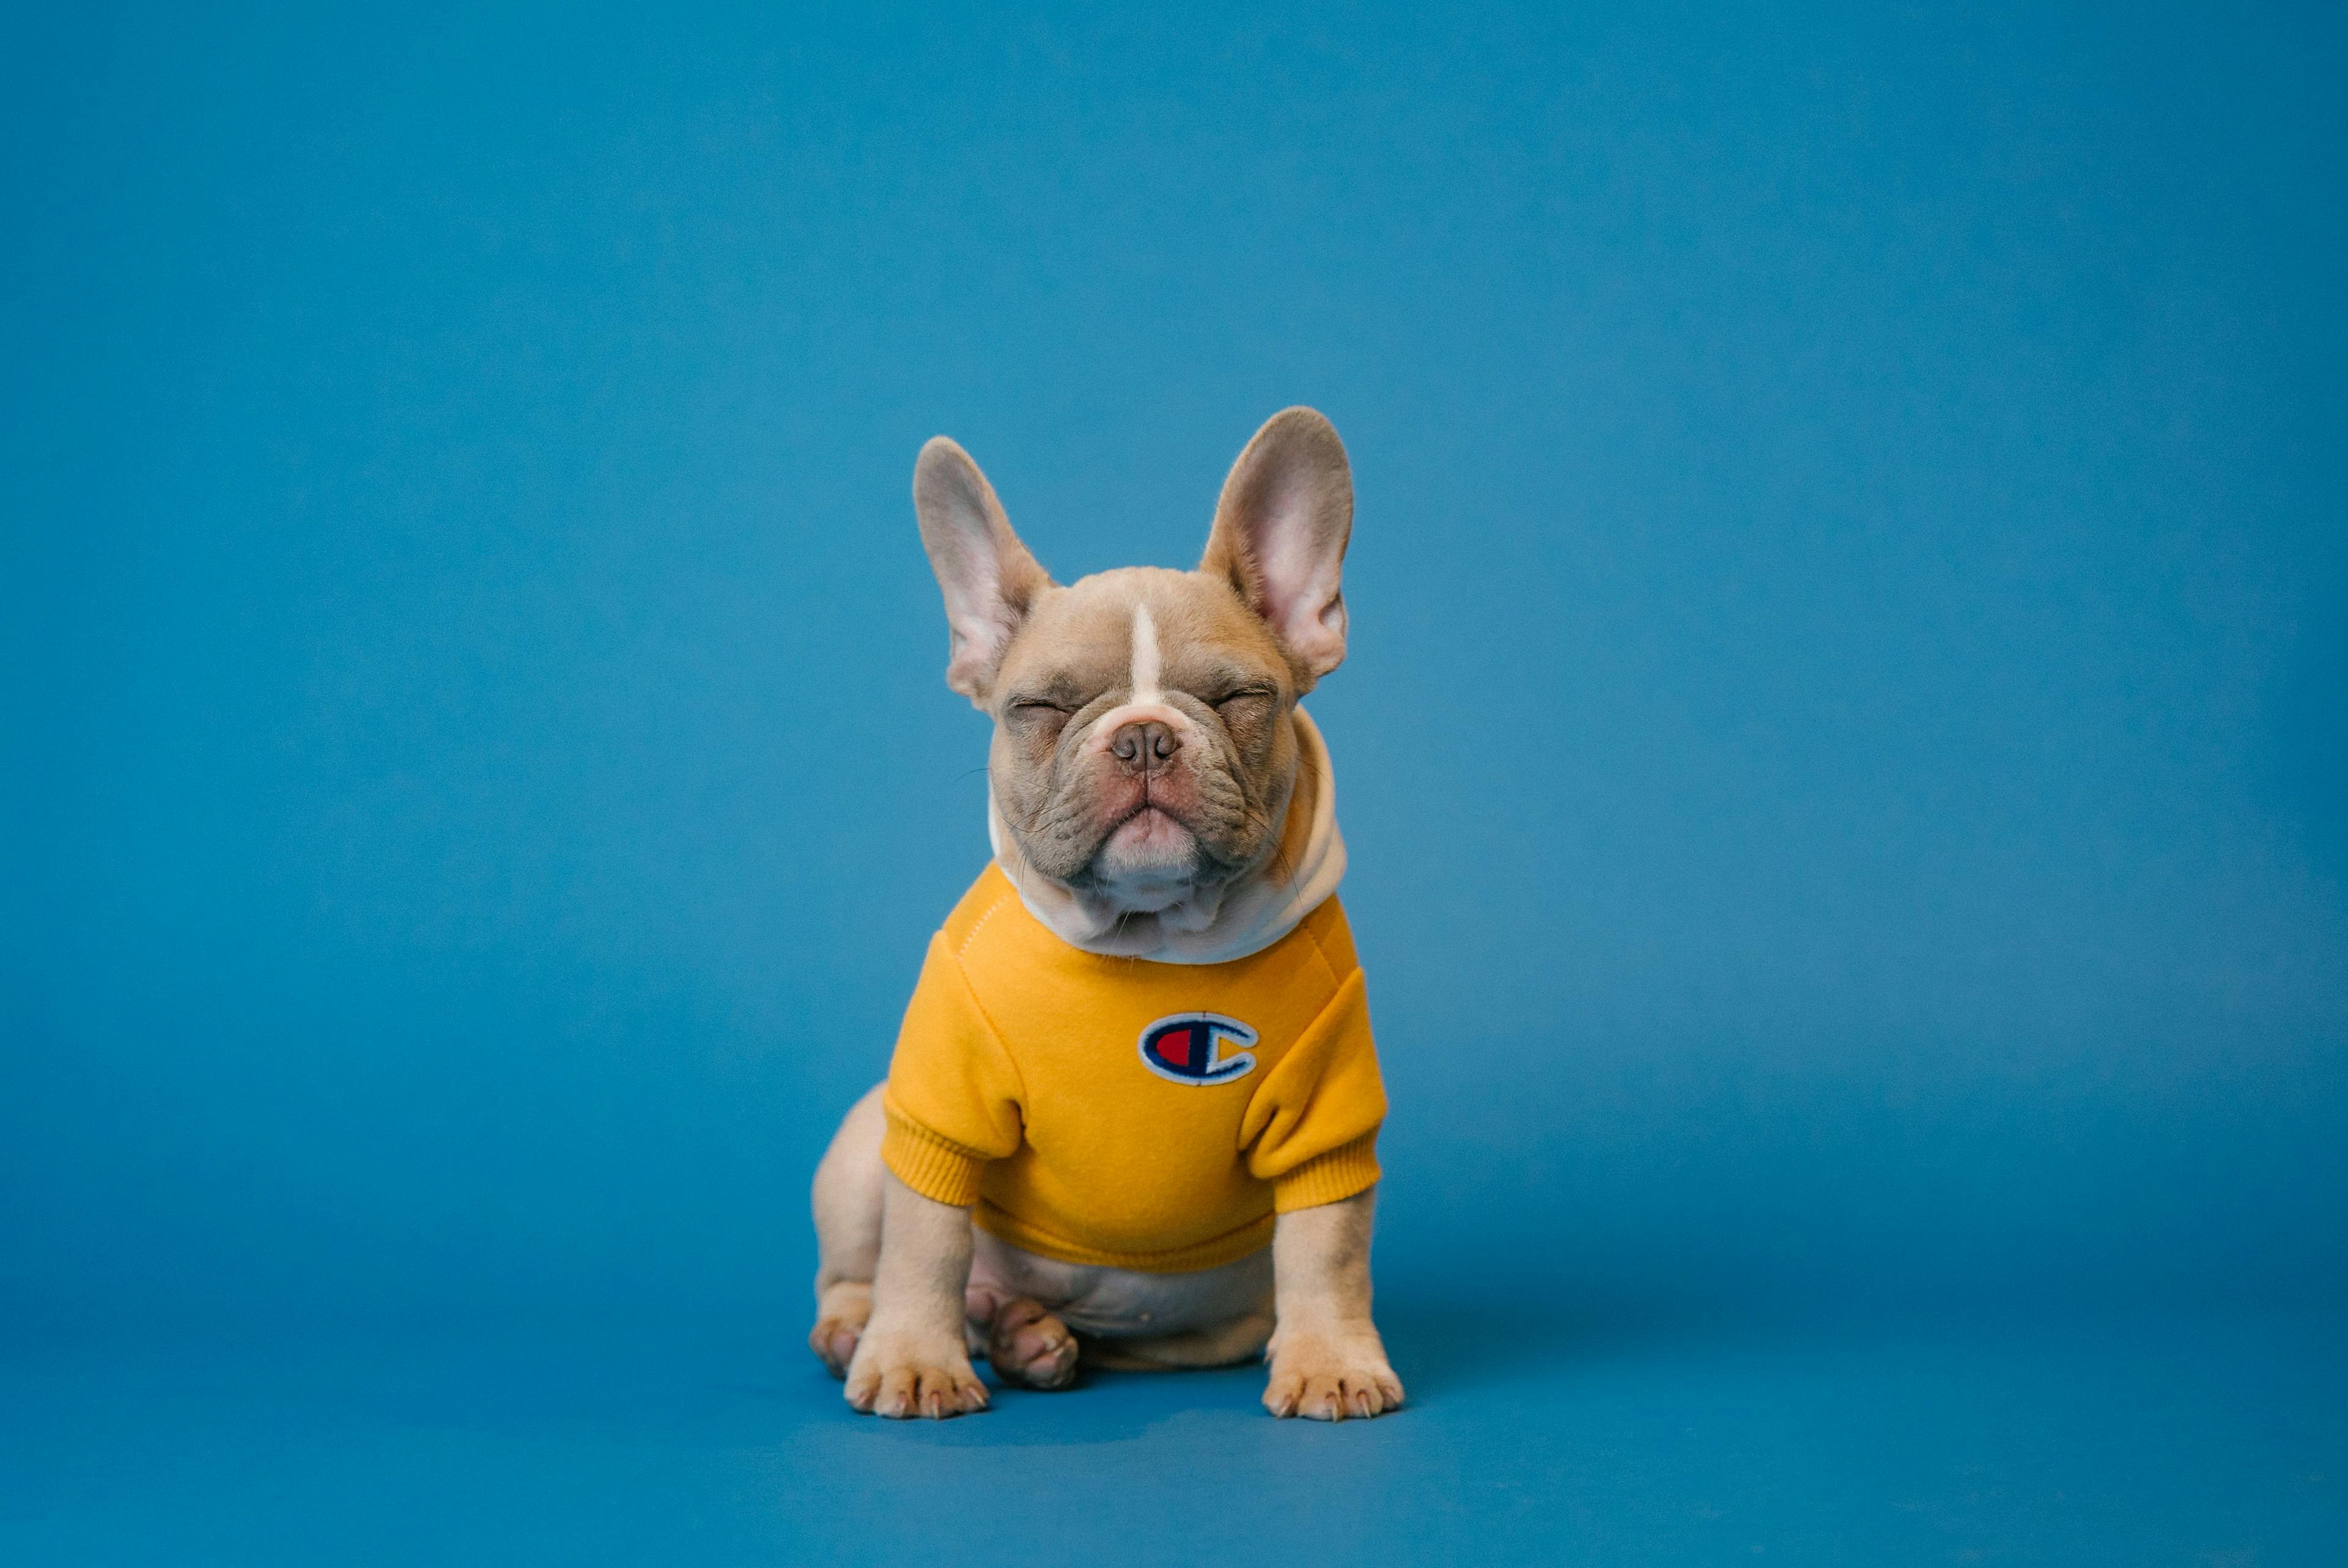 Dog with yellow sweatshirt in front of a blue background